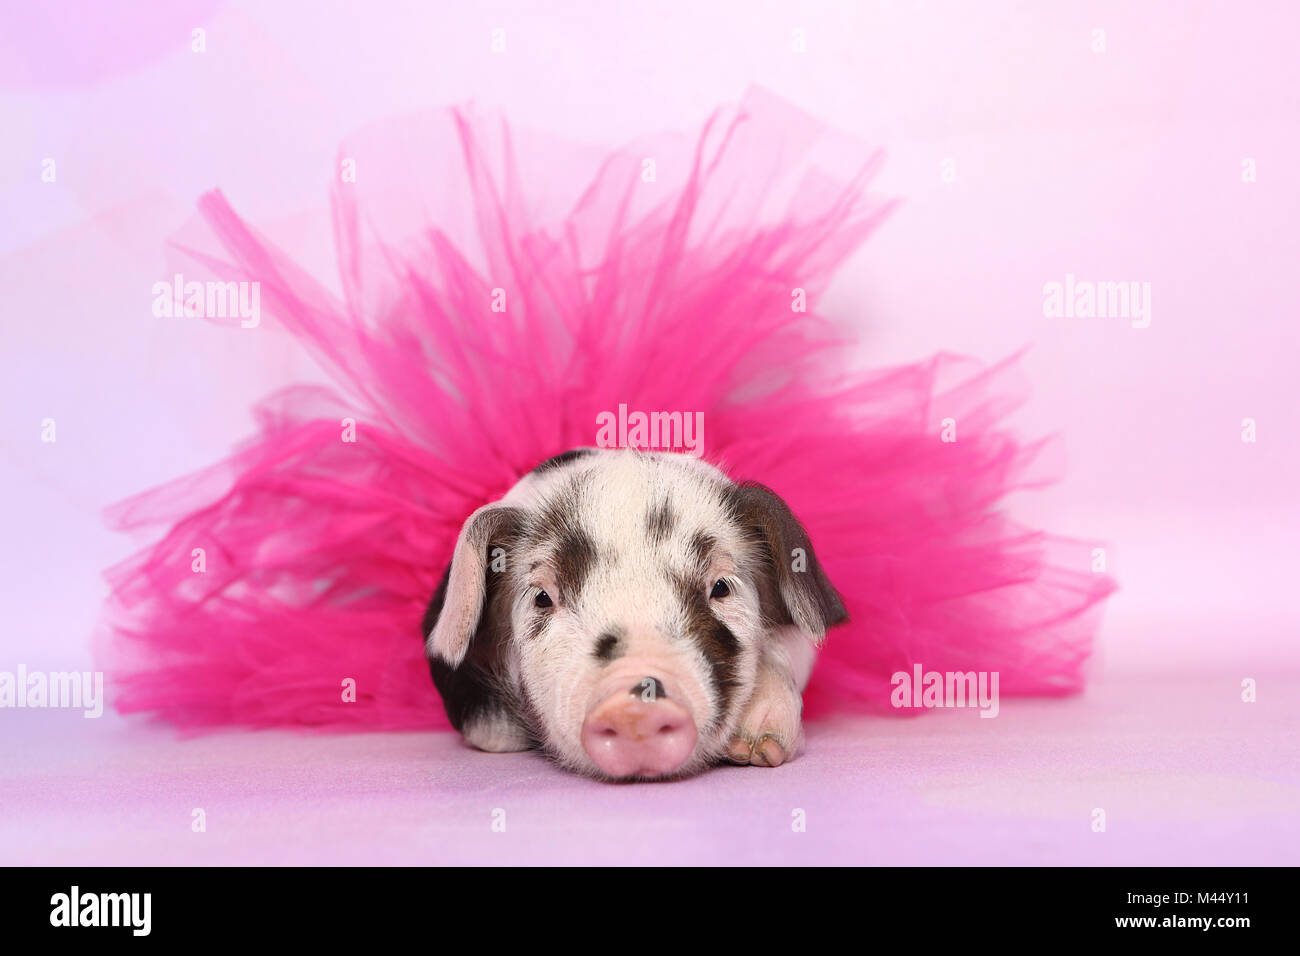 Domestic Pig, Turopolje x ?. Piglet (4 weeks old) wearing a pink tutu, lying. Studio picture seen against a pink background. Germany Stock Photo